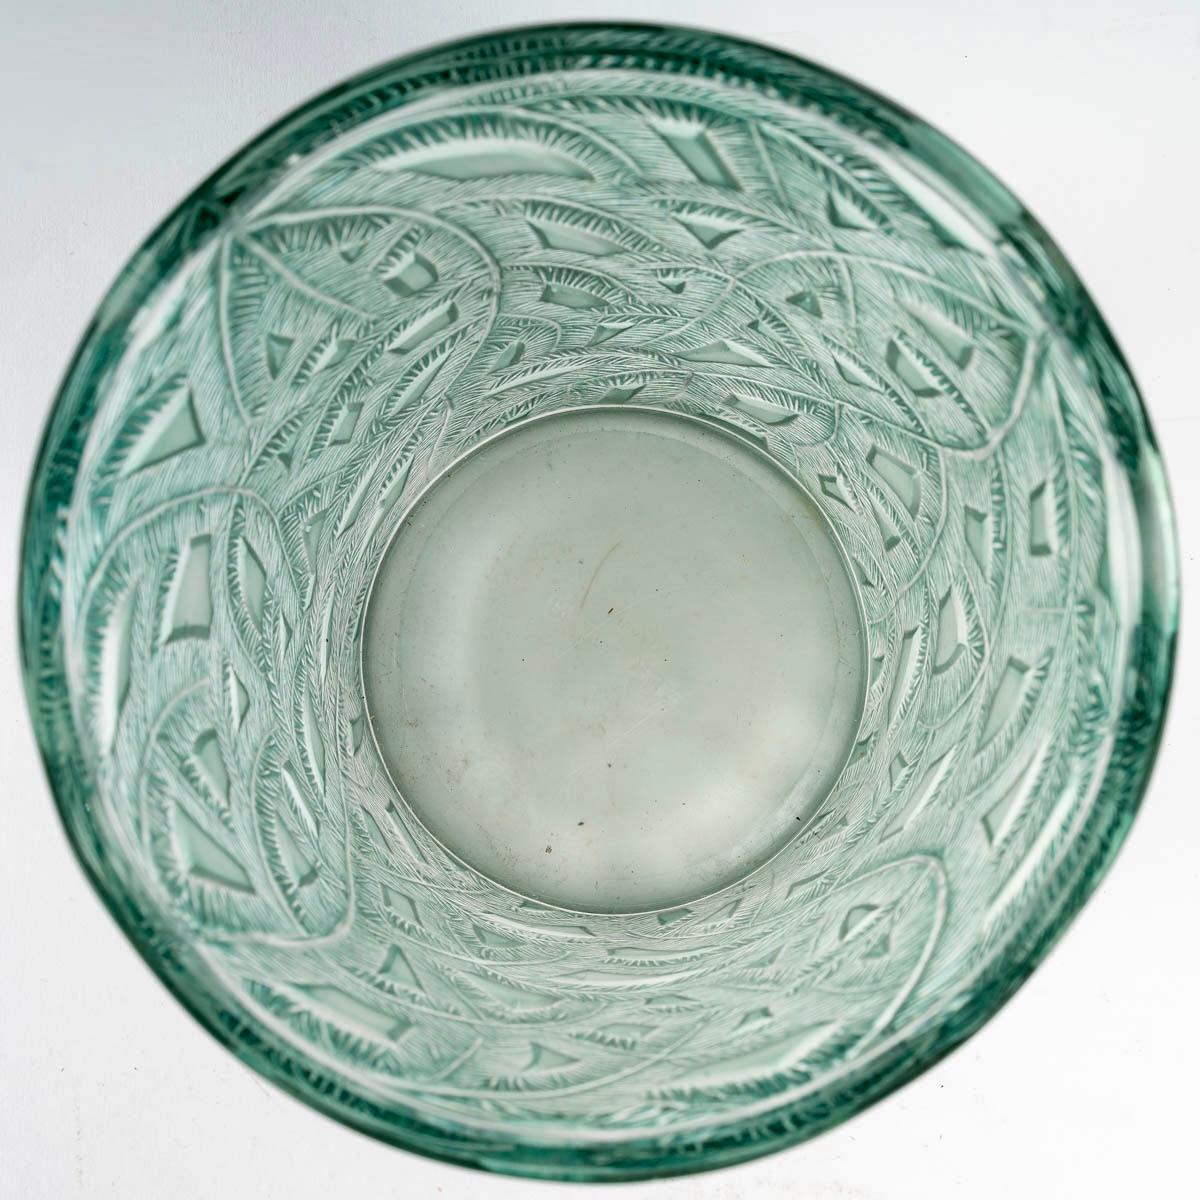 Molded 1923 René Lalique Epicea Vase in Frosted Glass with Green Patina, Spruce